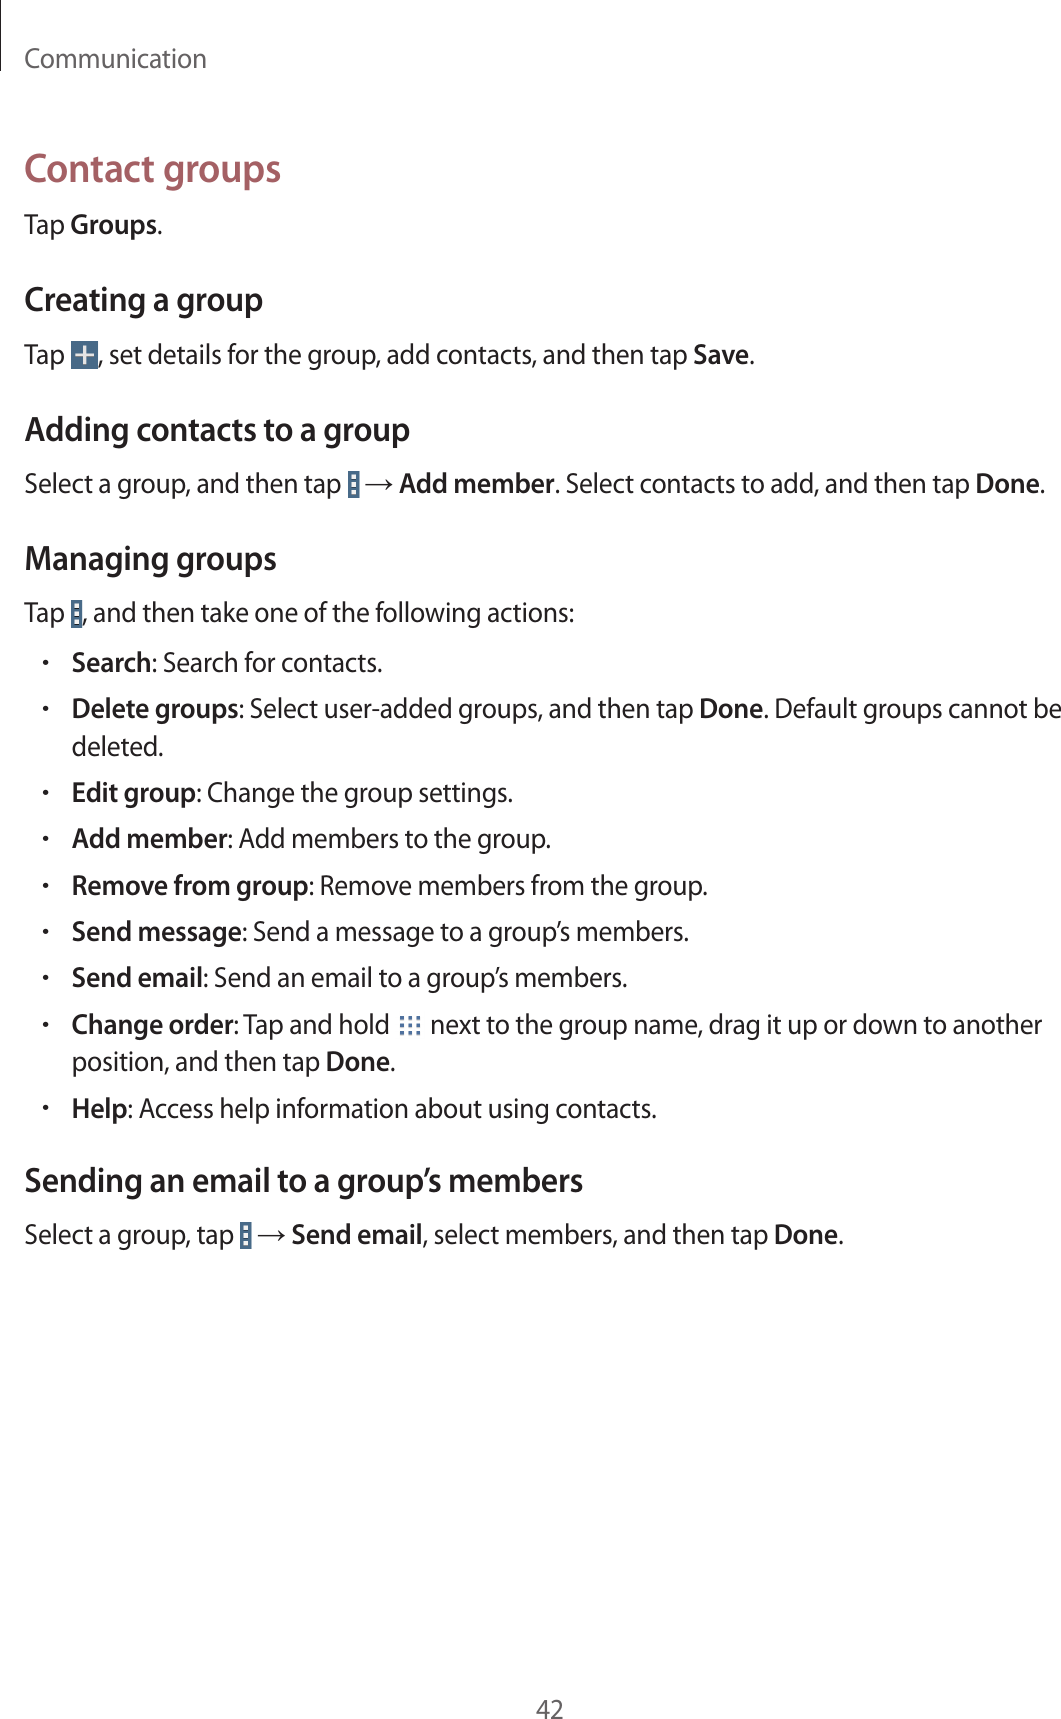 Communication42Contact groupsTap Groups.Creating a groupTap  , set details for the group, add contacts, and then tap Save.Adding contacts to a groupSelect a group, and then tap   → Add member. Select contacts to add, and then tap Done.Managing groupsTap  , and then take one of the following actions:•Search: Search for contacts.•Delete groups: Select user-added groups, and then tap Done. Default groups cannot be deleted.•Edit group: Change the group settings.•Add member: Add members to the group.•Remove from group: Remove members from the group.•Send message: Send a message to a group’s members.•Send email: Send an email to a group’s members.•Change order: Tap and hold   next to the group name, drag it up or down to another position, and then tap Done.•Help: Access help information about using contacts.Sending an email to a group’s membersSelect a group, tap   → Send email, select members, and then tap Done.